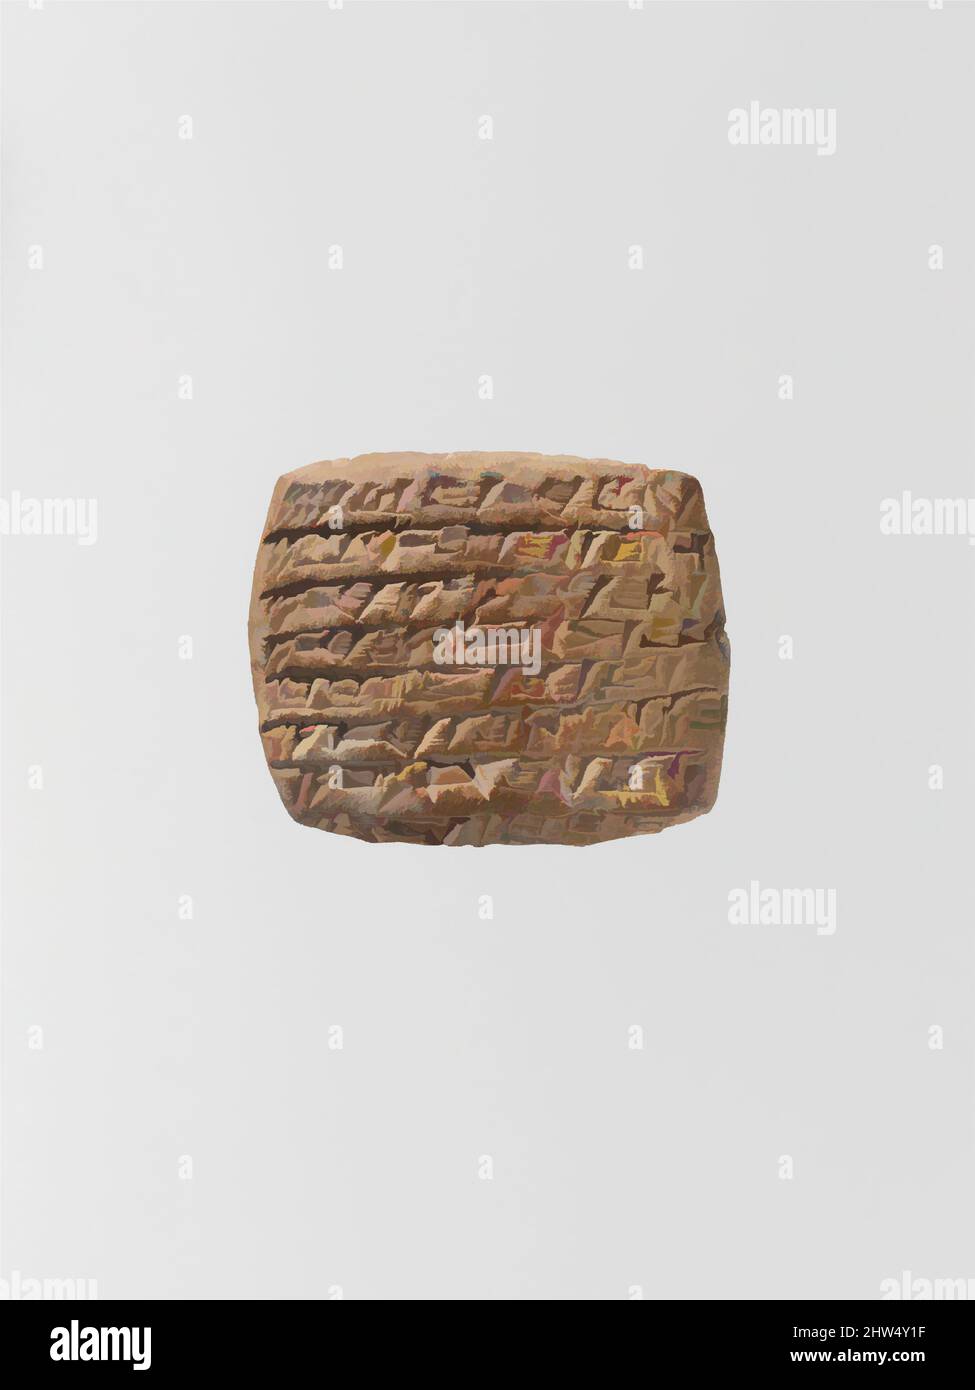 Art inspired by Cuneiform tablet: quittance, Middle Bronze Age–Old Assyrian Trading Colony, ca. 20th–19th century B.C., Anatolia, probably from Kültepe (Karum Kanesh), Old Assyrian Trading Colony, Clay, 3.7 x 4.5 x 1.4 cm (1 1/2 x 1 3/4 x 1/2 in.), Clay-Tablets-Inscribed, Classic works modernized by Artotop with a splash of modernity. Shapes, color and value, eye-catching visual impact on art. Emotions through freedom of artworks in a contemporary way. A timeless message pursuing a wildly creative new direction. Artists turning to the digital medium and creating the Artotop NFT Stock Photo